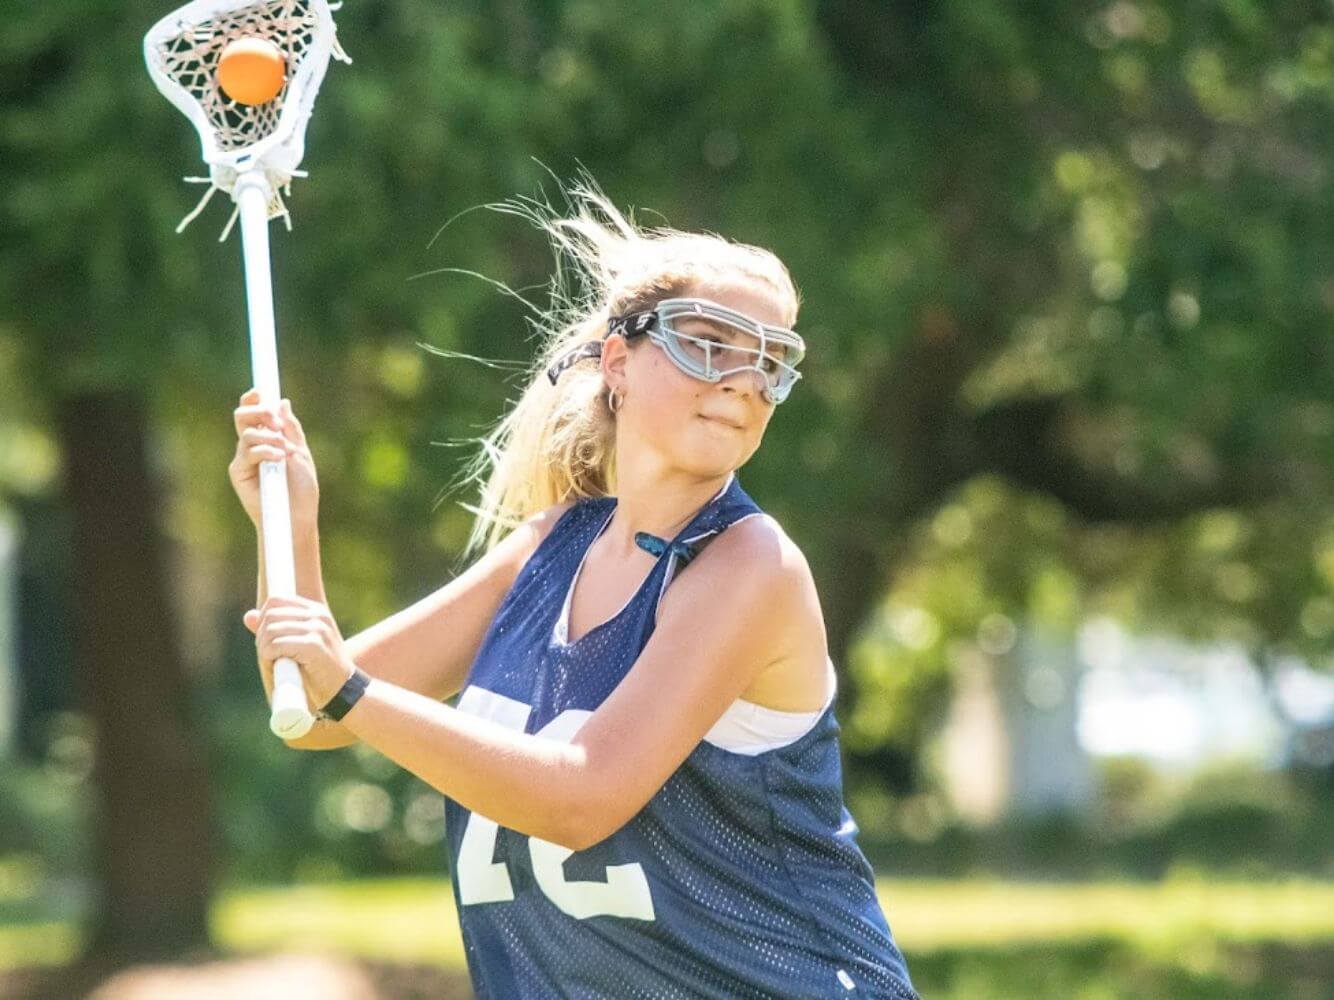 Lacrosse player practicing the Attacker position during a scrimmage at summer camp